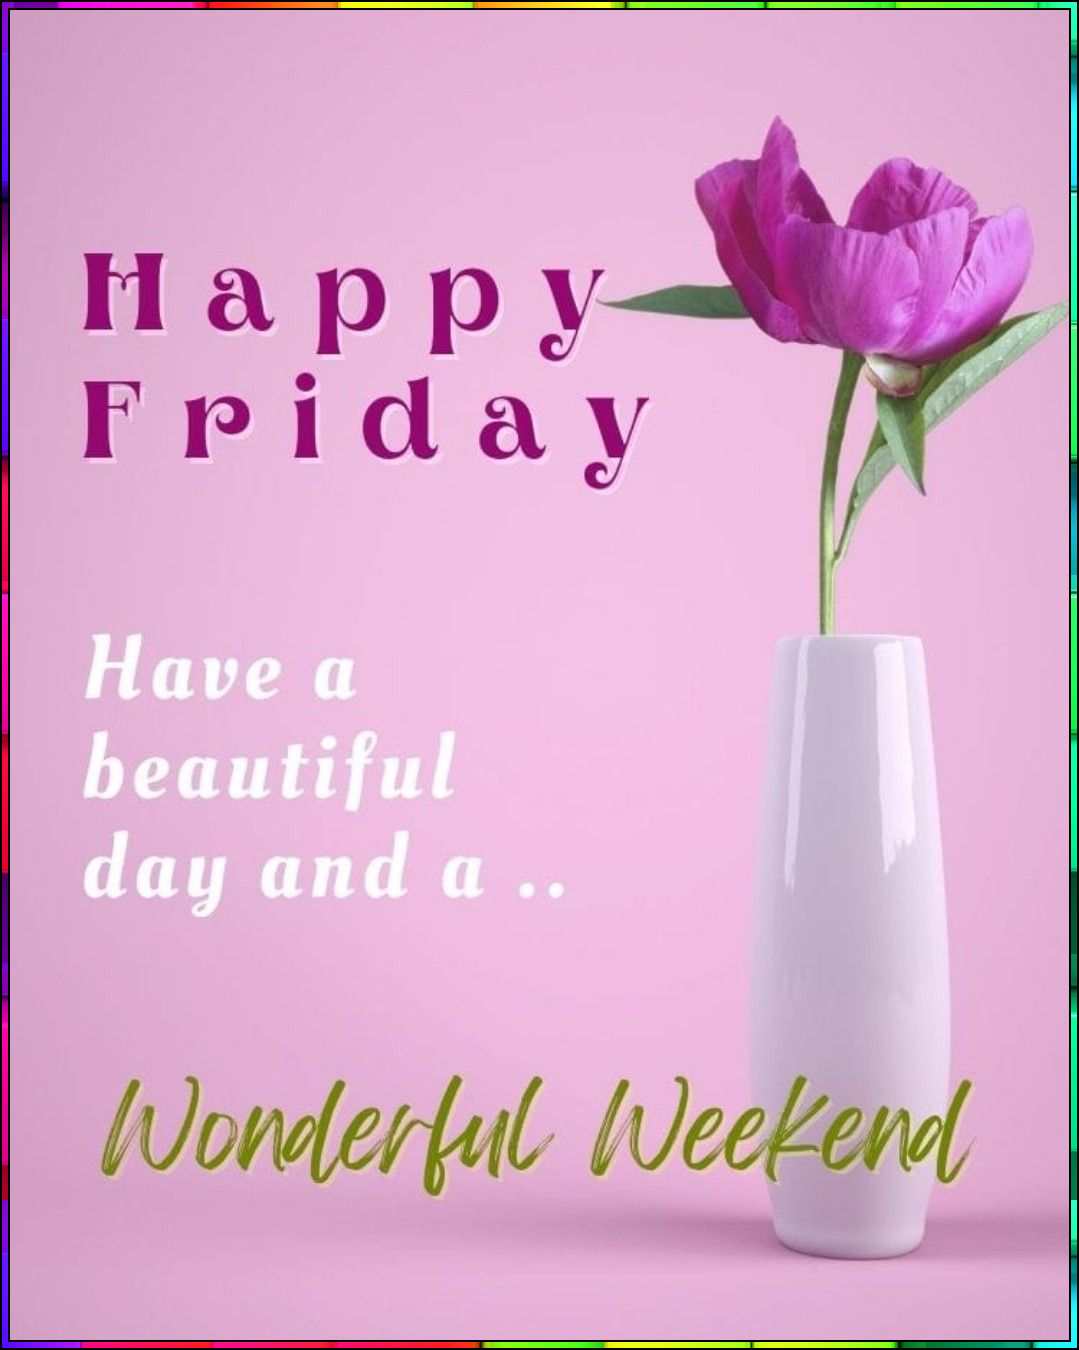 happy friday have a beautiful day and wonderful weekend